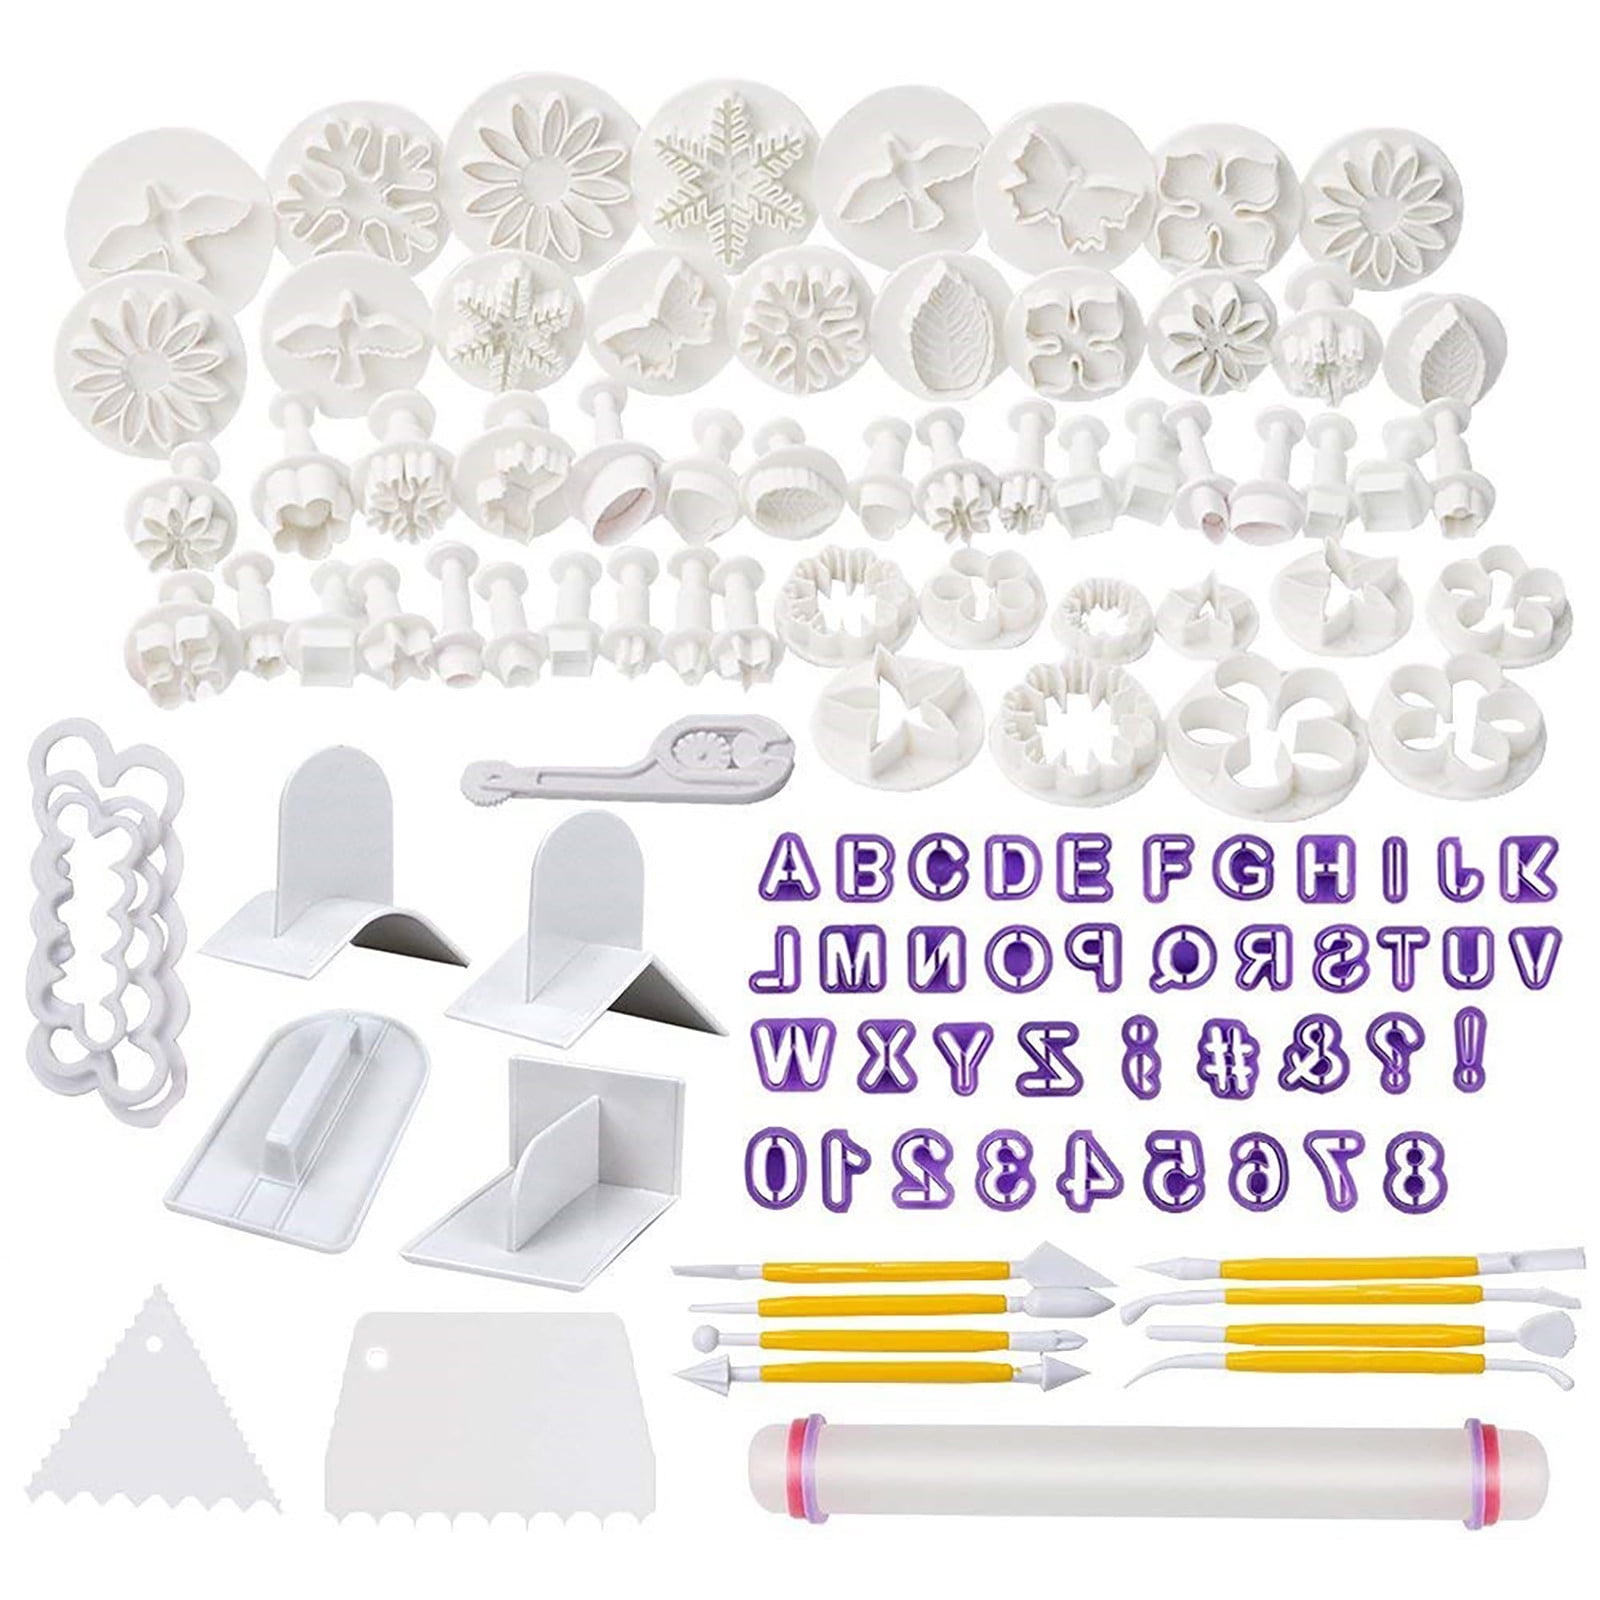 Details about   Plastic Fondant Cookie Cutters Pastry Biscuit Cake Decor Embossing Baking Mould 